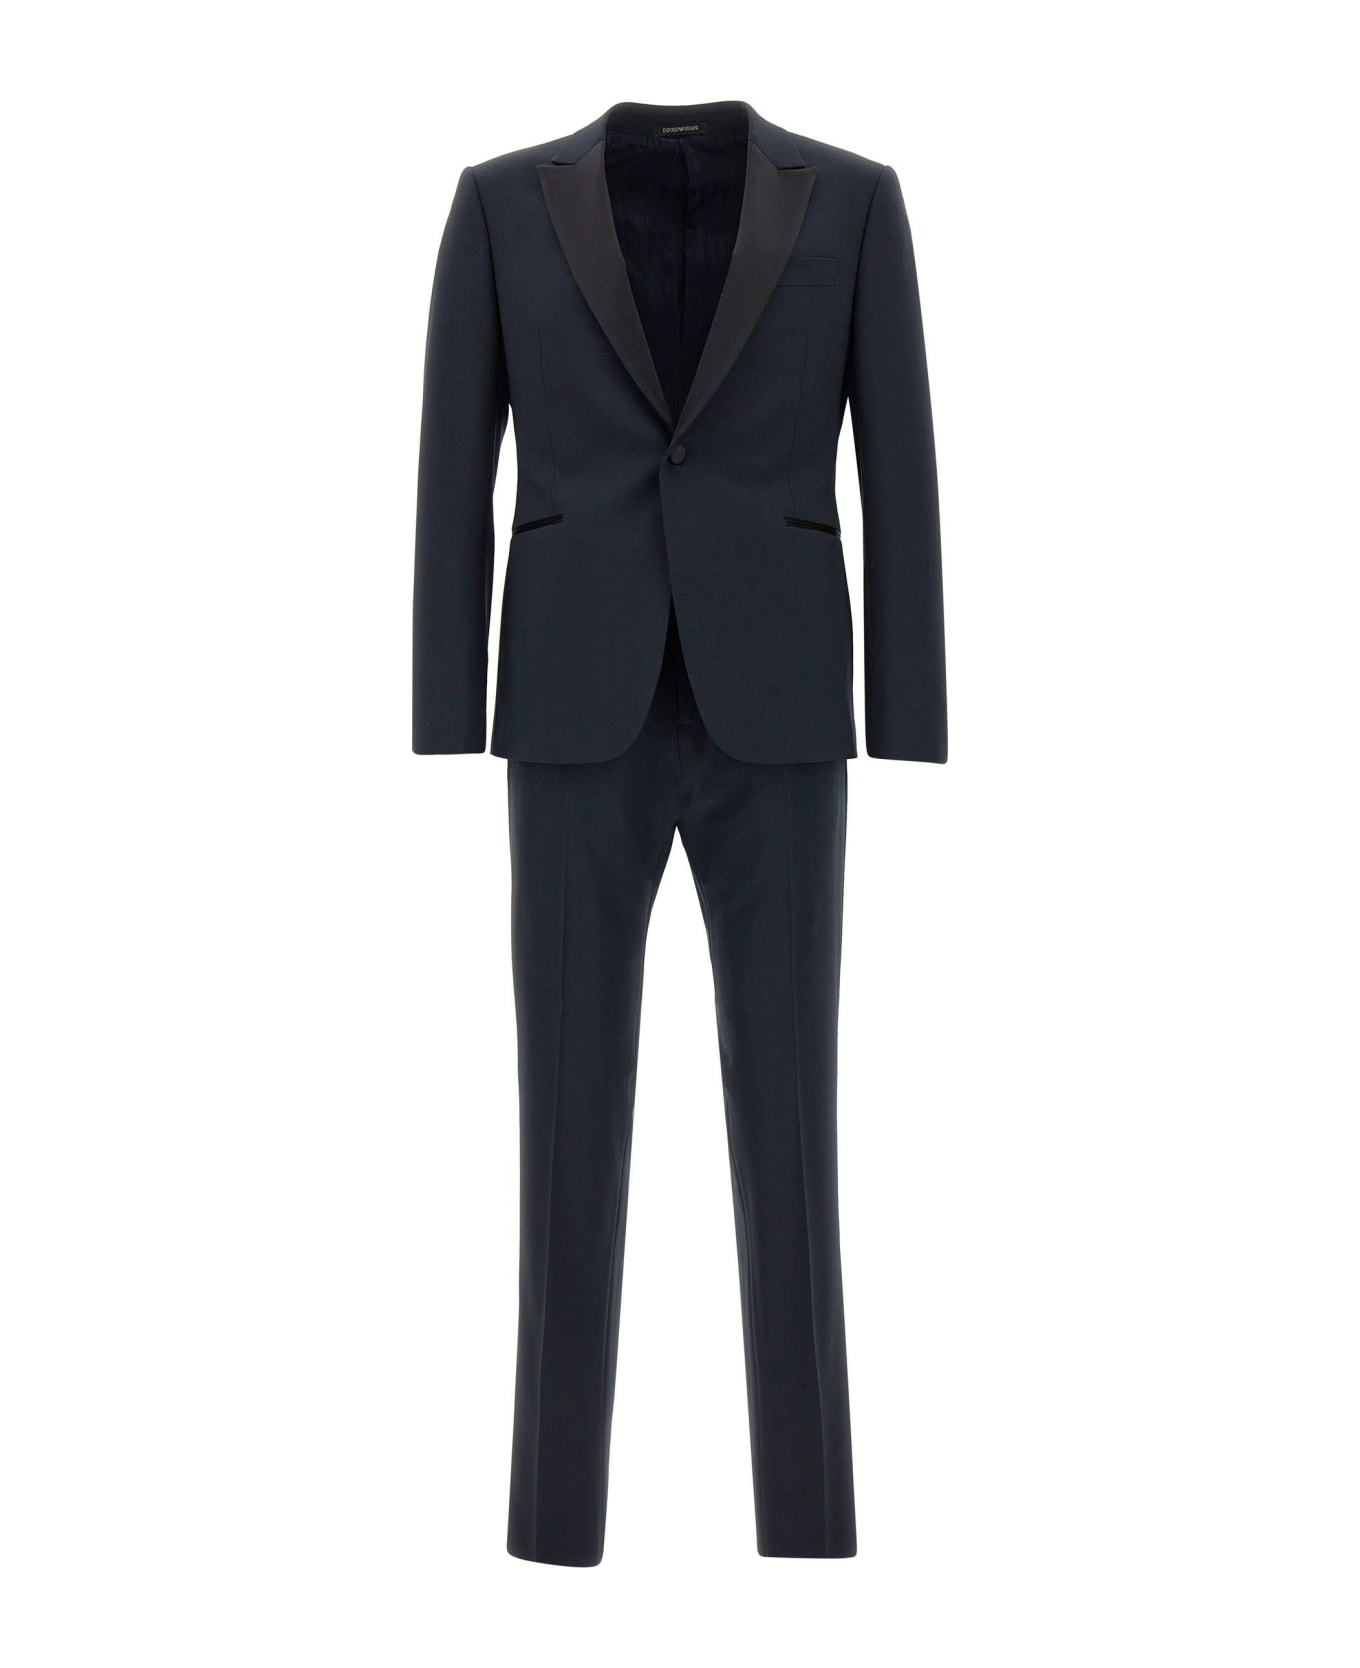 Emporio Armani Fresh Wool Two-piece Formal Suit - Navy